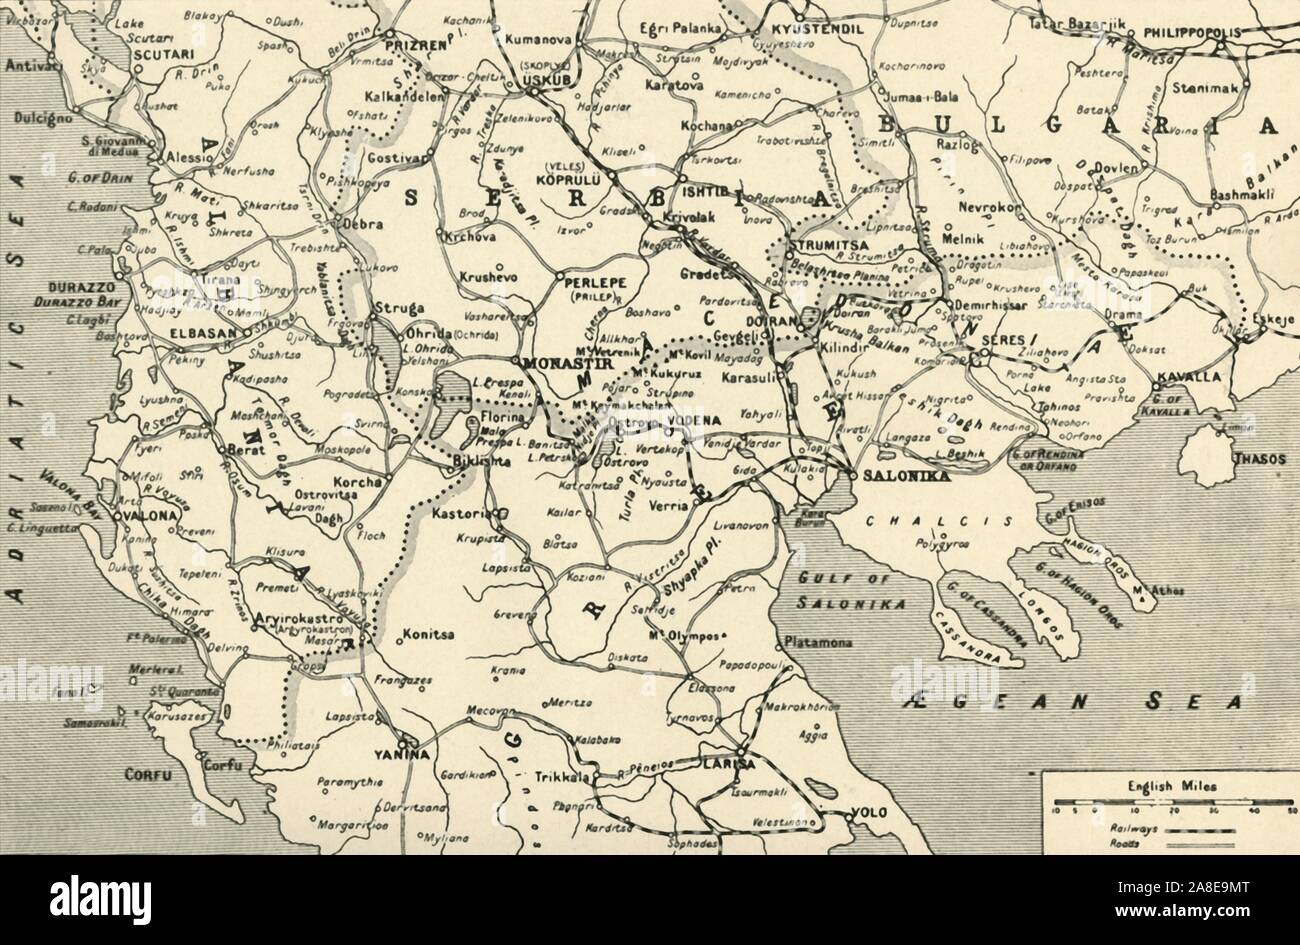 'General Map of the Balkan Operations in the Autumn of 1916', 1917. The Balkans campaign was fought between the Central Powers and the Allies, hostility between Serbia and Austria-Hungary was the prime cause of World War I. From &quot;The War Illustrated Album De Luxe - Volume VII. The Autumn Campaign of 1916&quot;, edited by J. A. Hammerton. [The Amalgamated Press, Limited, London, 1917] Stock Photo